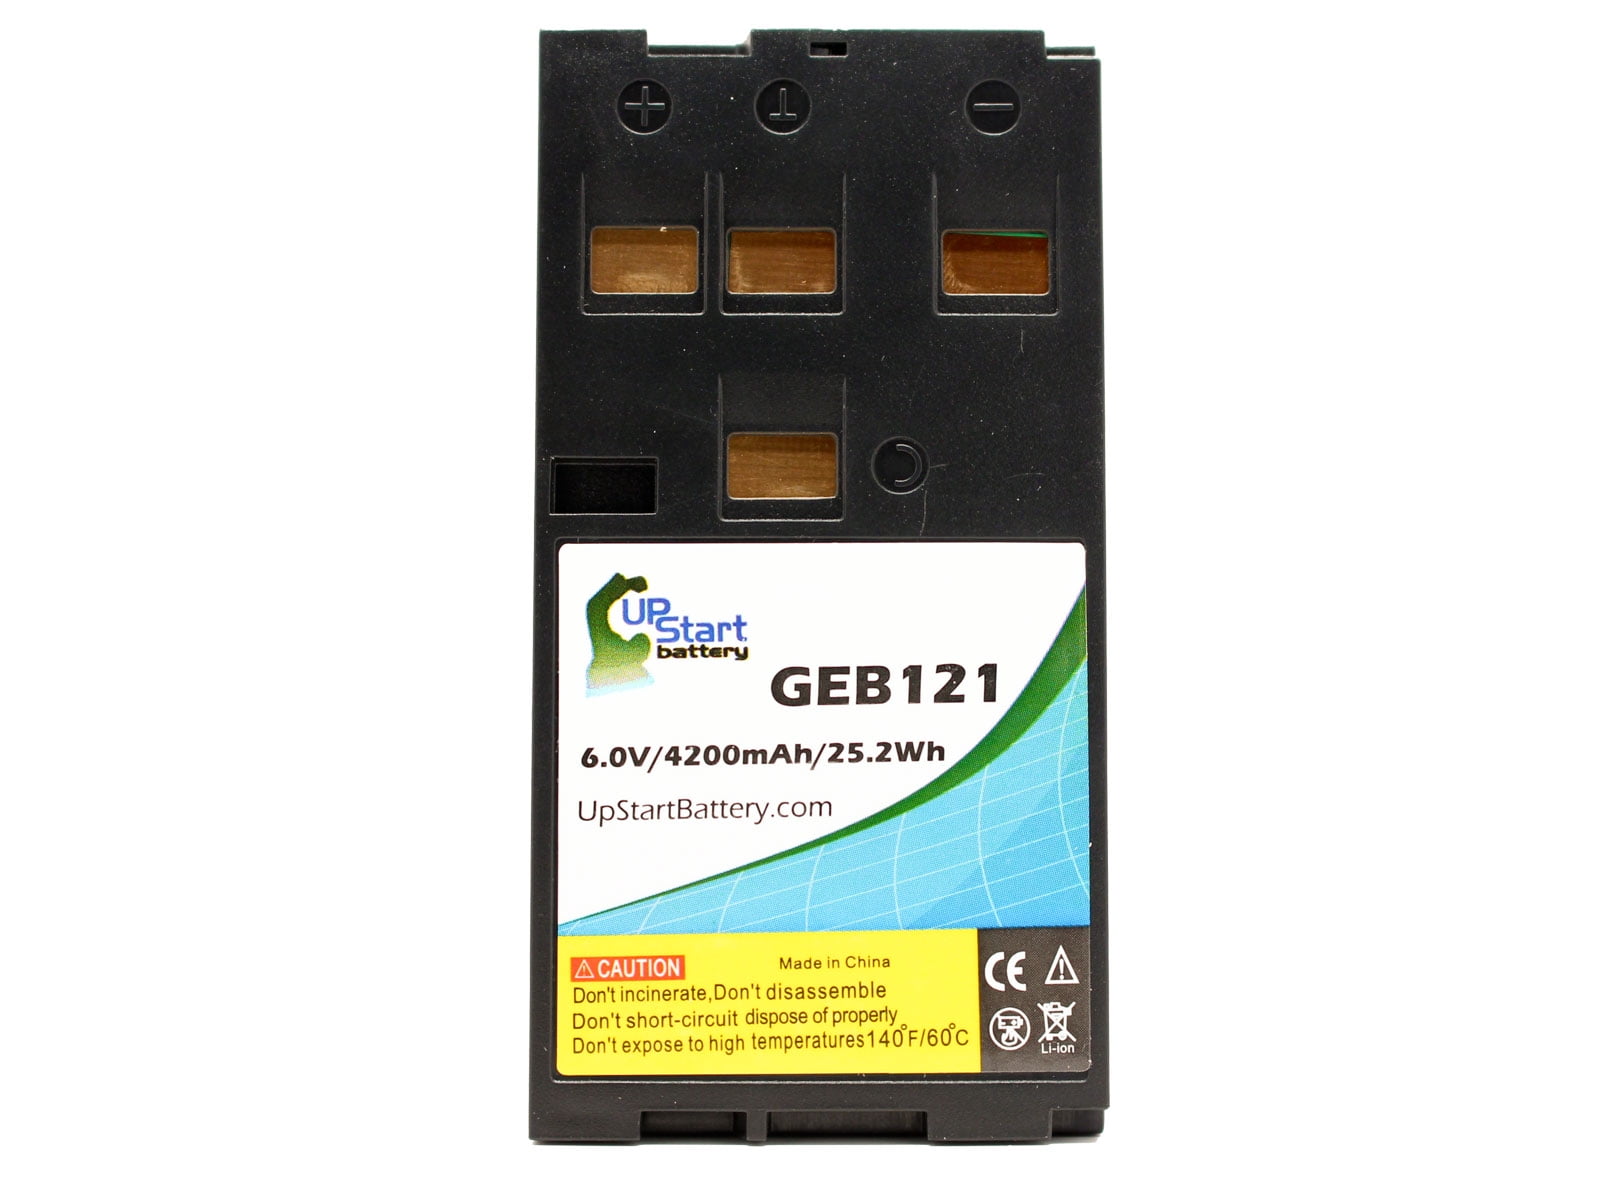 Replacement GEB121 Battery for Leica GEB121 Total Station Battery 